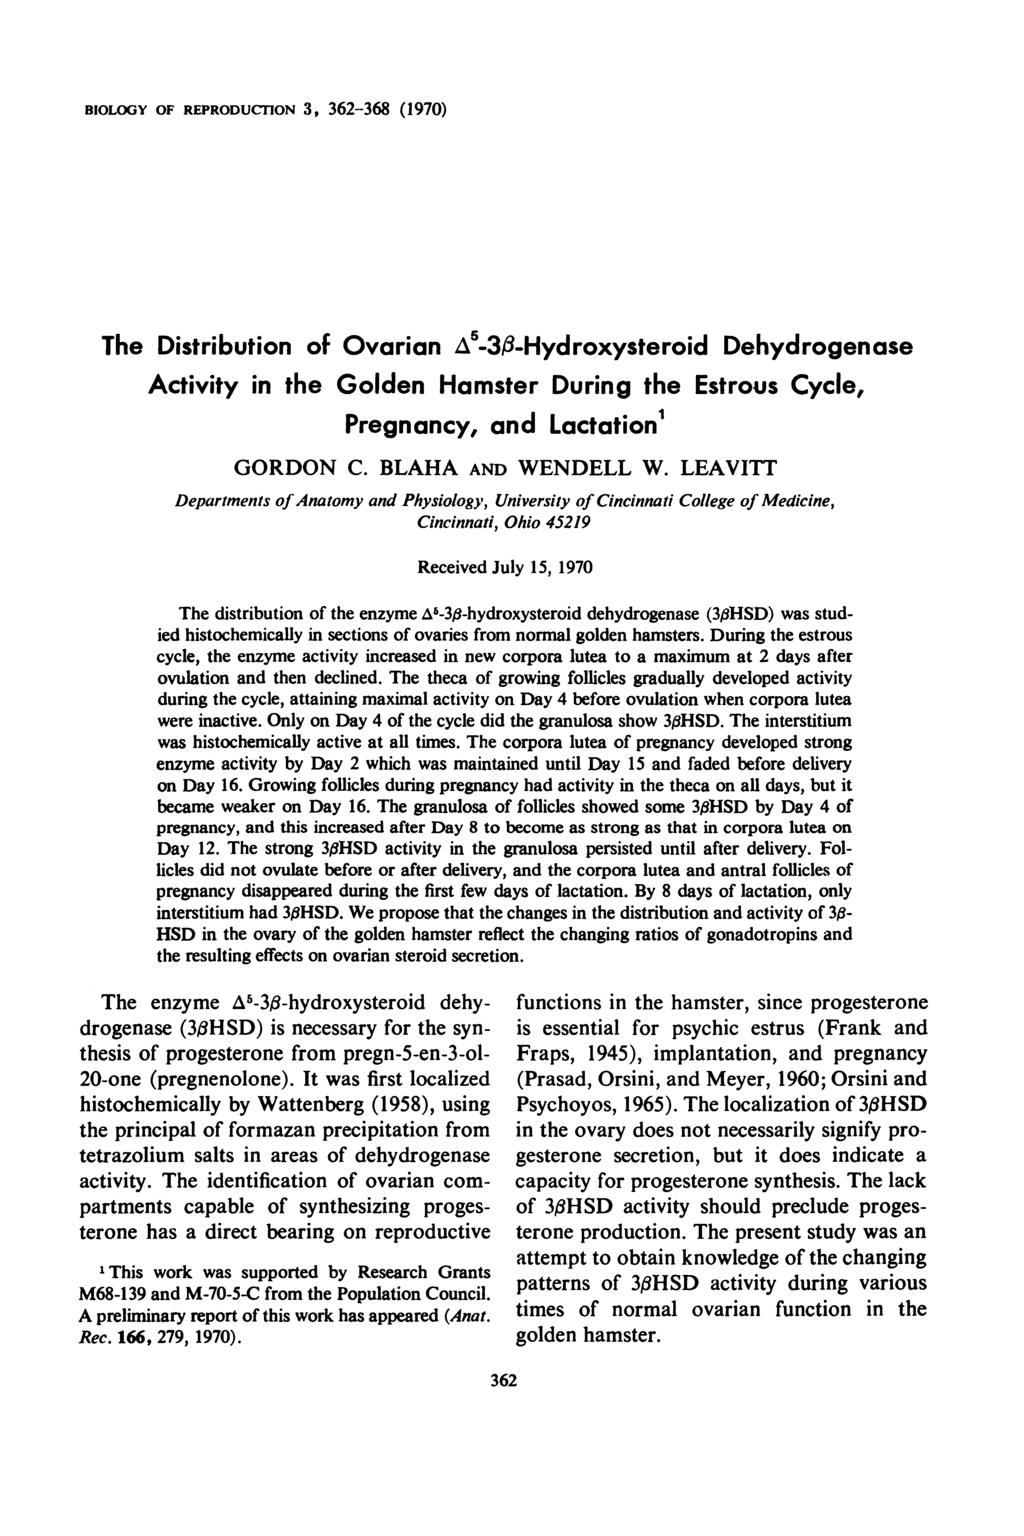 BIOLOGY OF REPRODUCrION, 6-68 (197) The Distribution of Ovarian -$-Hyd roxysteroid Dehyd rogen ase Activity in the Golden Hamster During the Estrous Cycle, Pregnancy, and Lactation GORDON C.